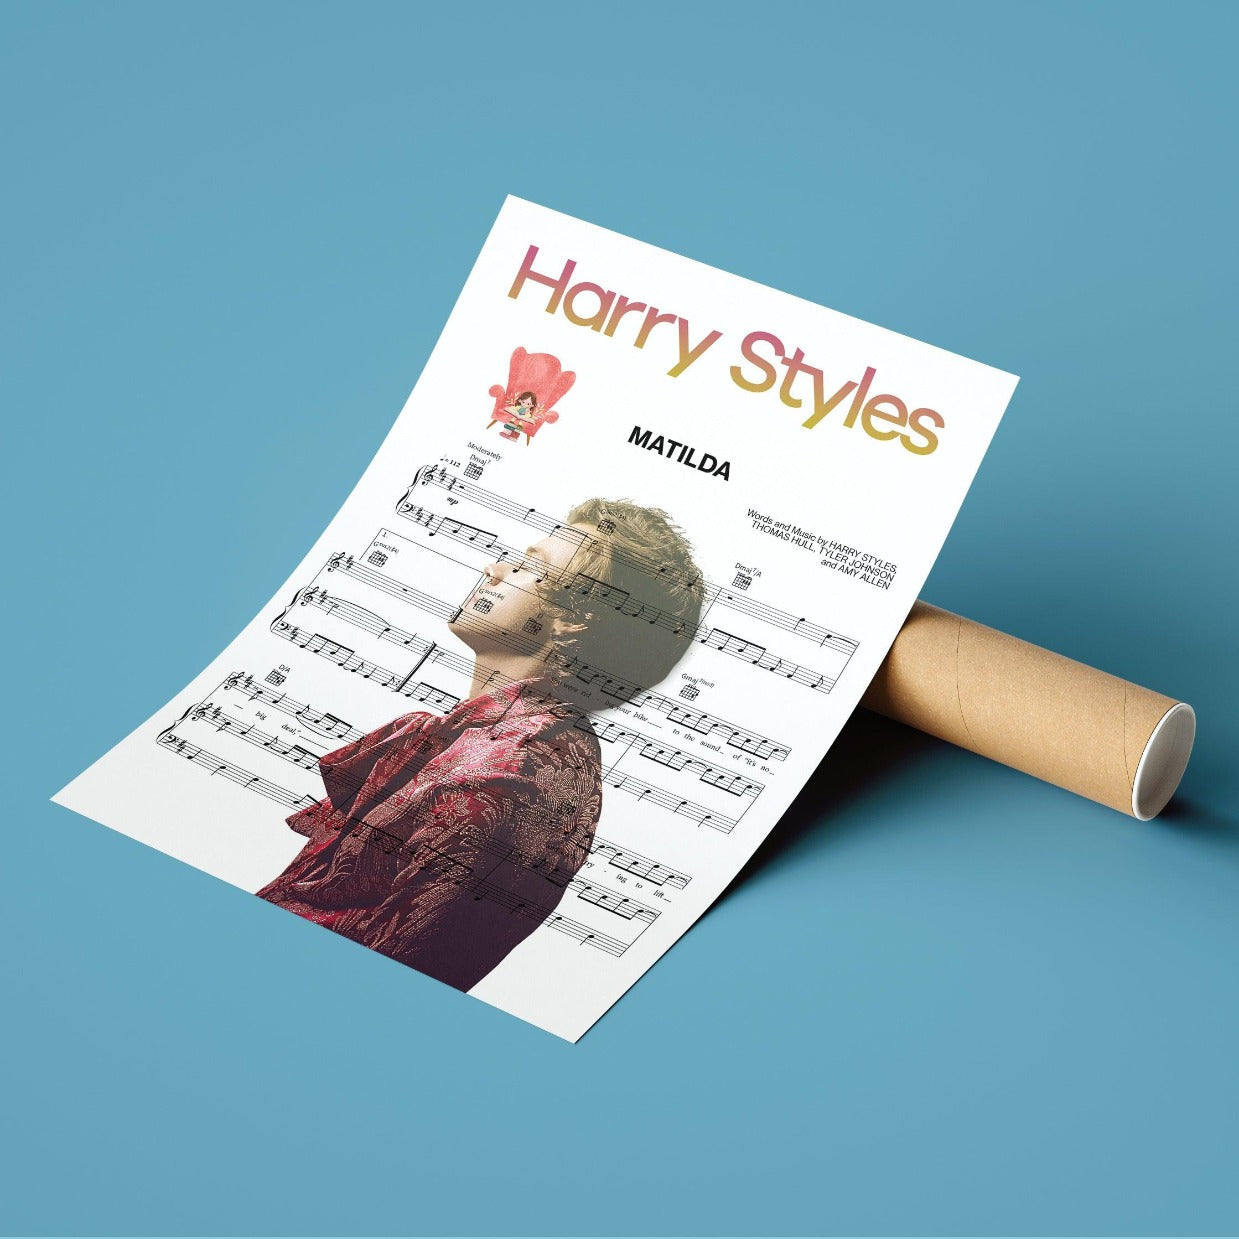 Matilda By Harry Styles, Harry's House Digital Download Lyrics Poster is made with museum-grade paper (175gsm fine art paper), and are the perfect means to give for gifts